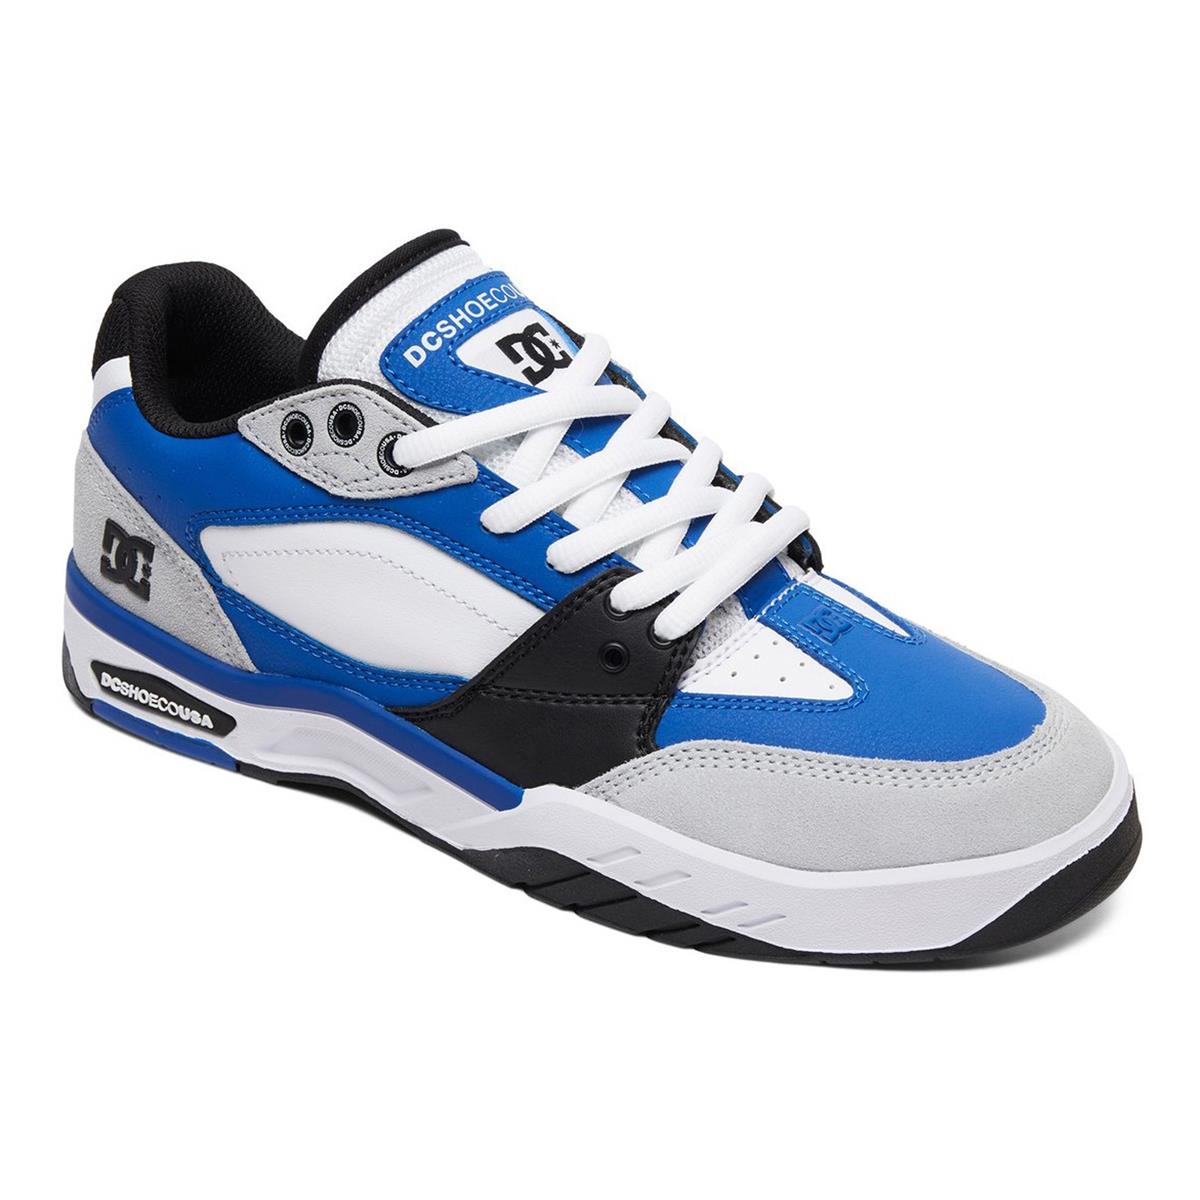 DC Chaussures Maswell Blue/Black/White